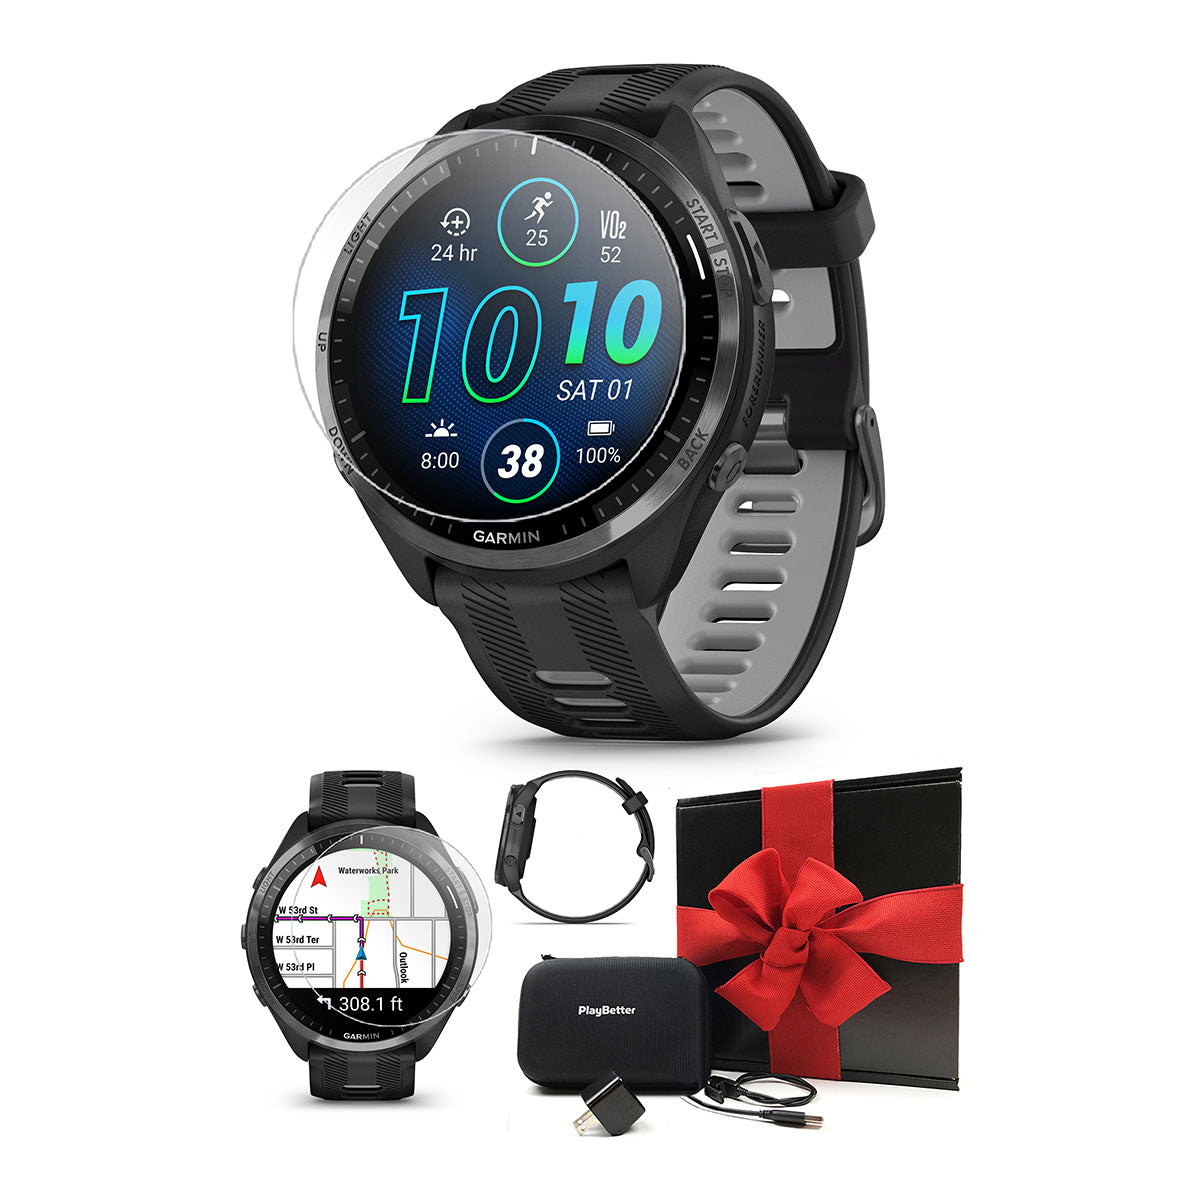 Garmin Forerunner 965 (Black/Powder Gray) Premium Running GPS Smartwatch | Gift Box with PlayBetter HD Screen Protectors, Wall Adapter & Case - image 1 of 7